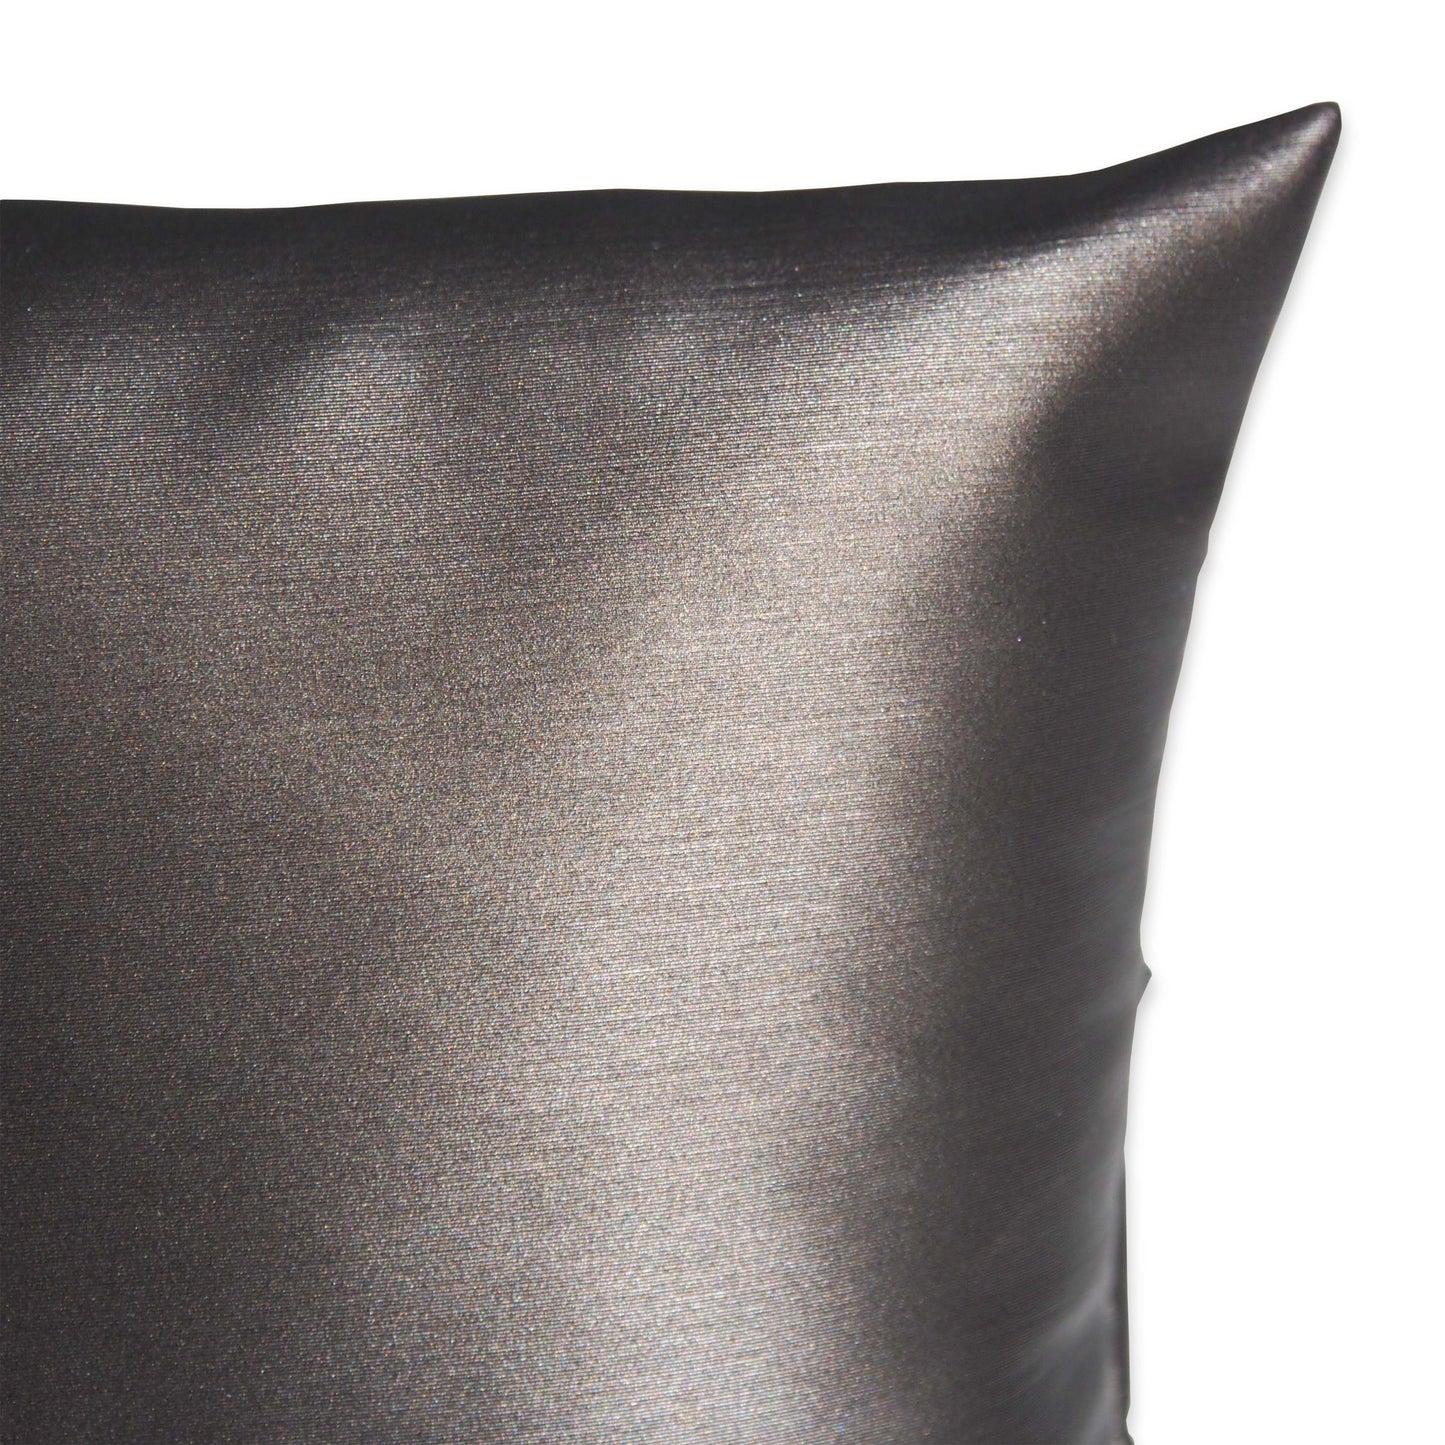 Steel Grey Pillow Displays (3 Sizes Available)